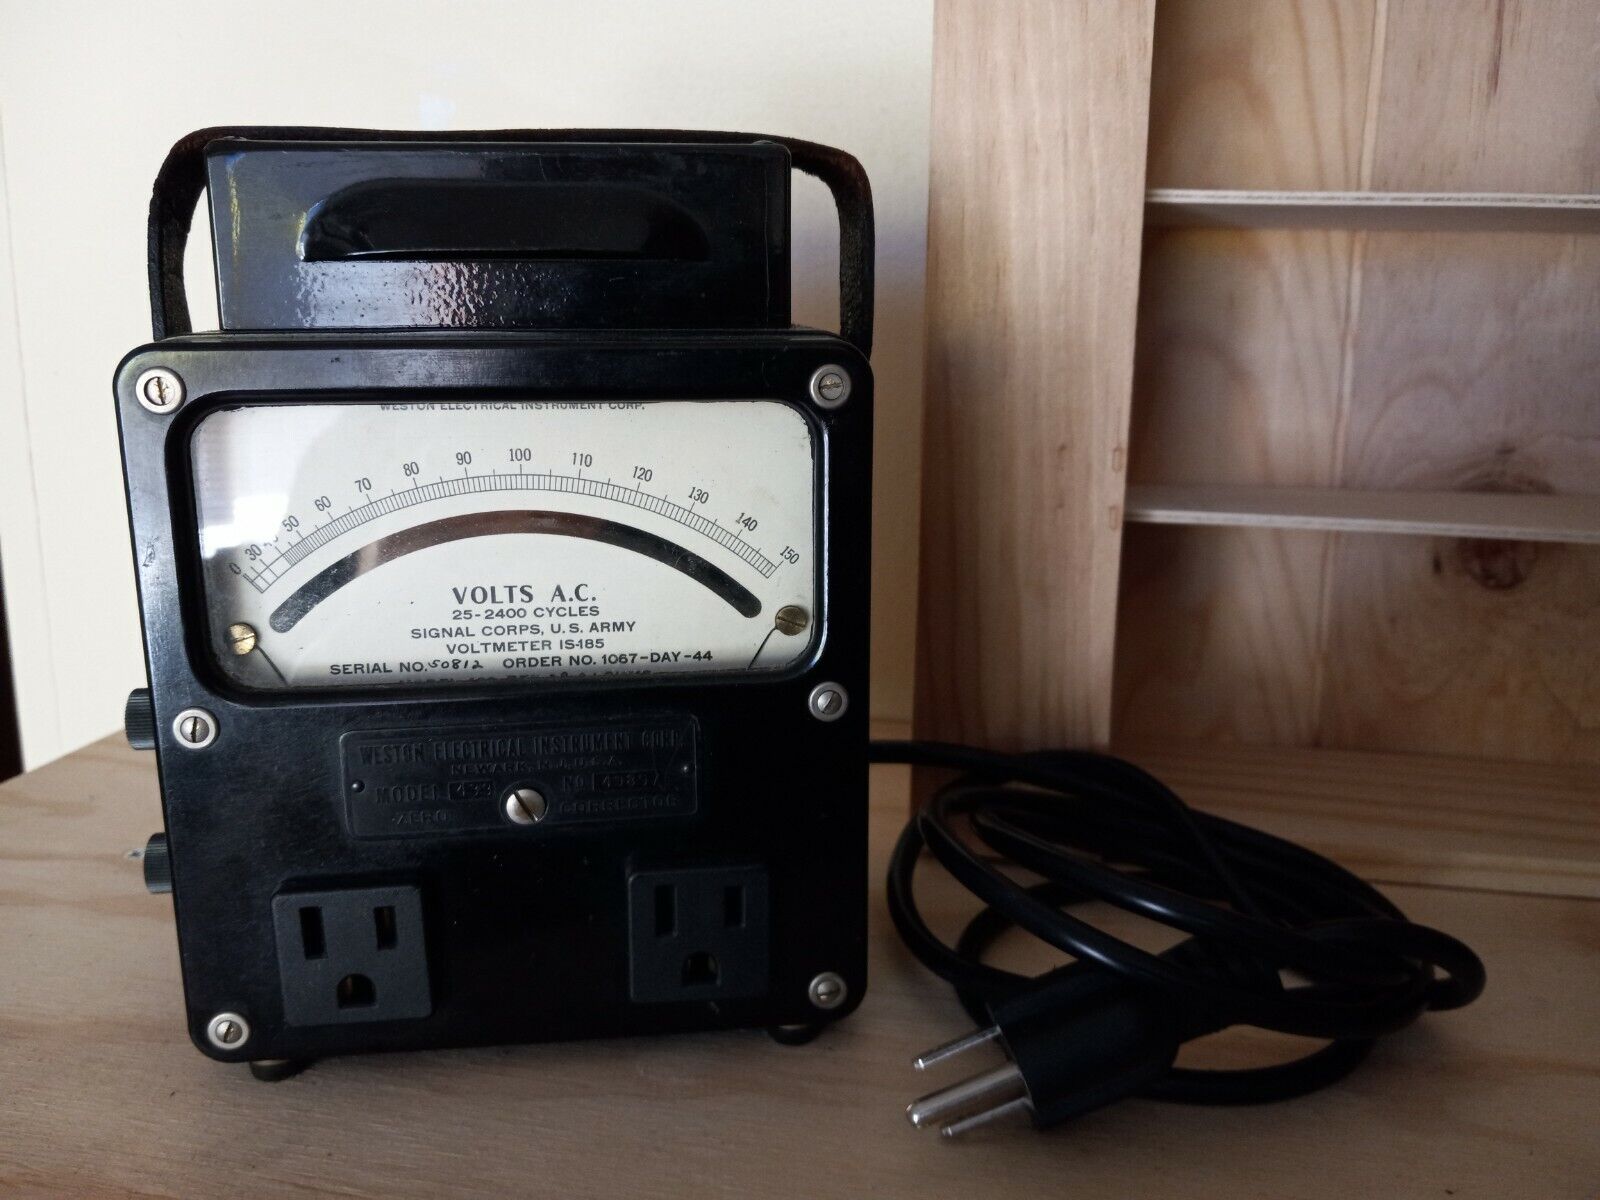 WESTON AC METER MODEL 433 CONVERTED INTO A NON-FUSED POWER STRIP